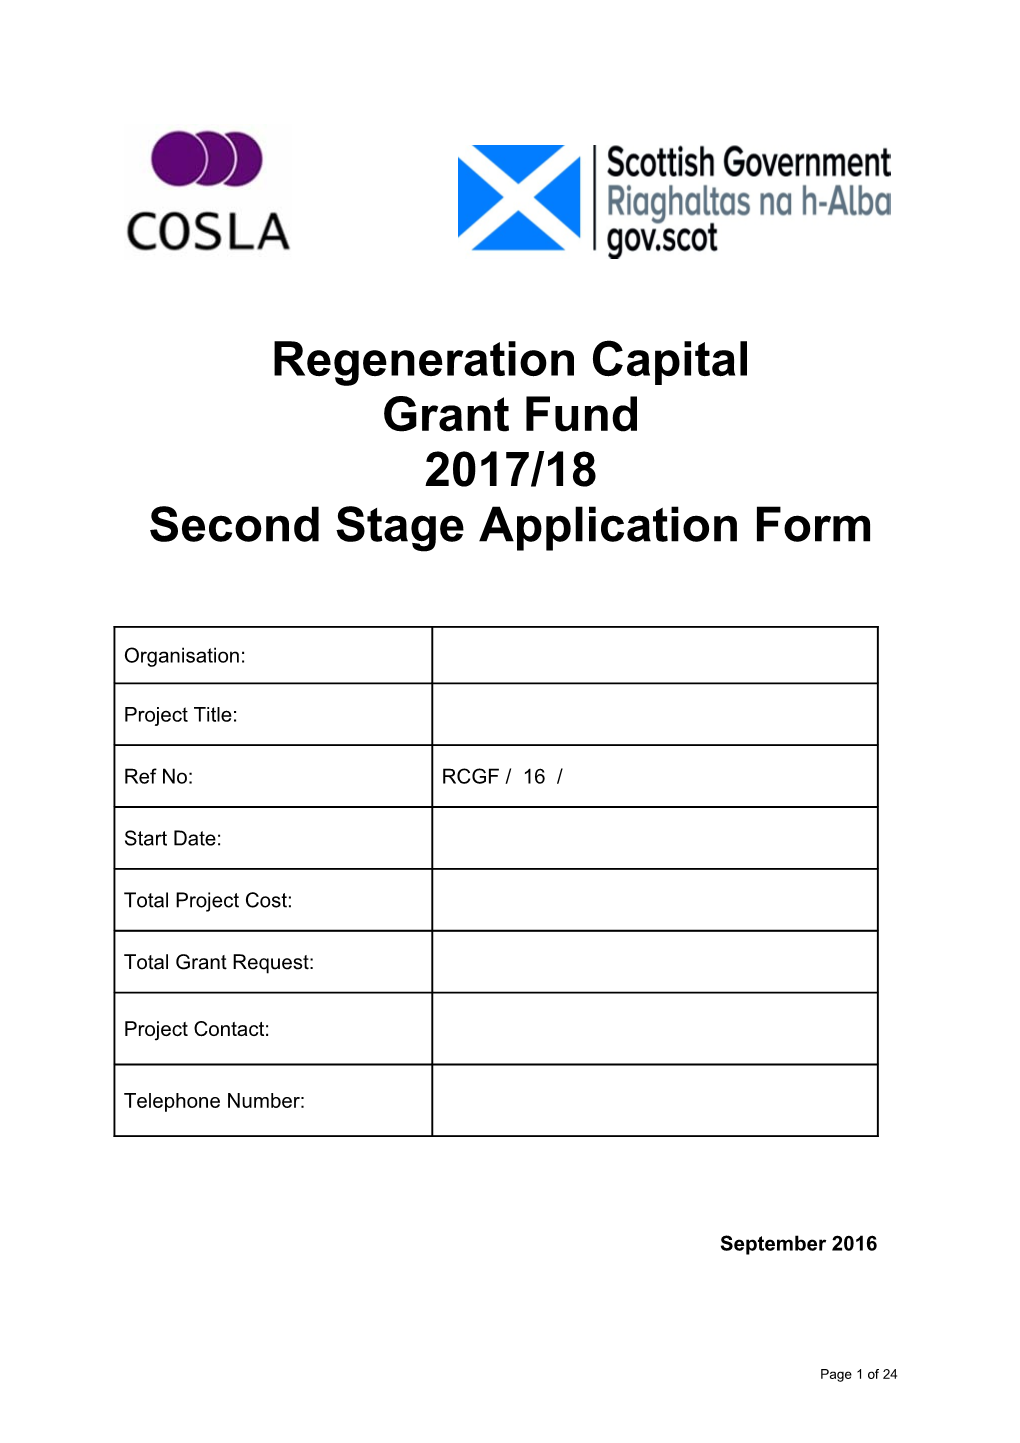 Second Stage Application Form